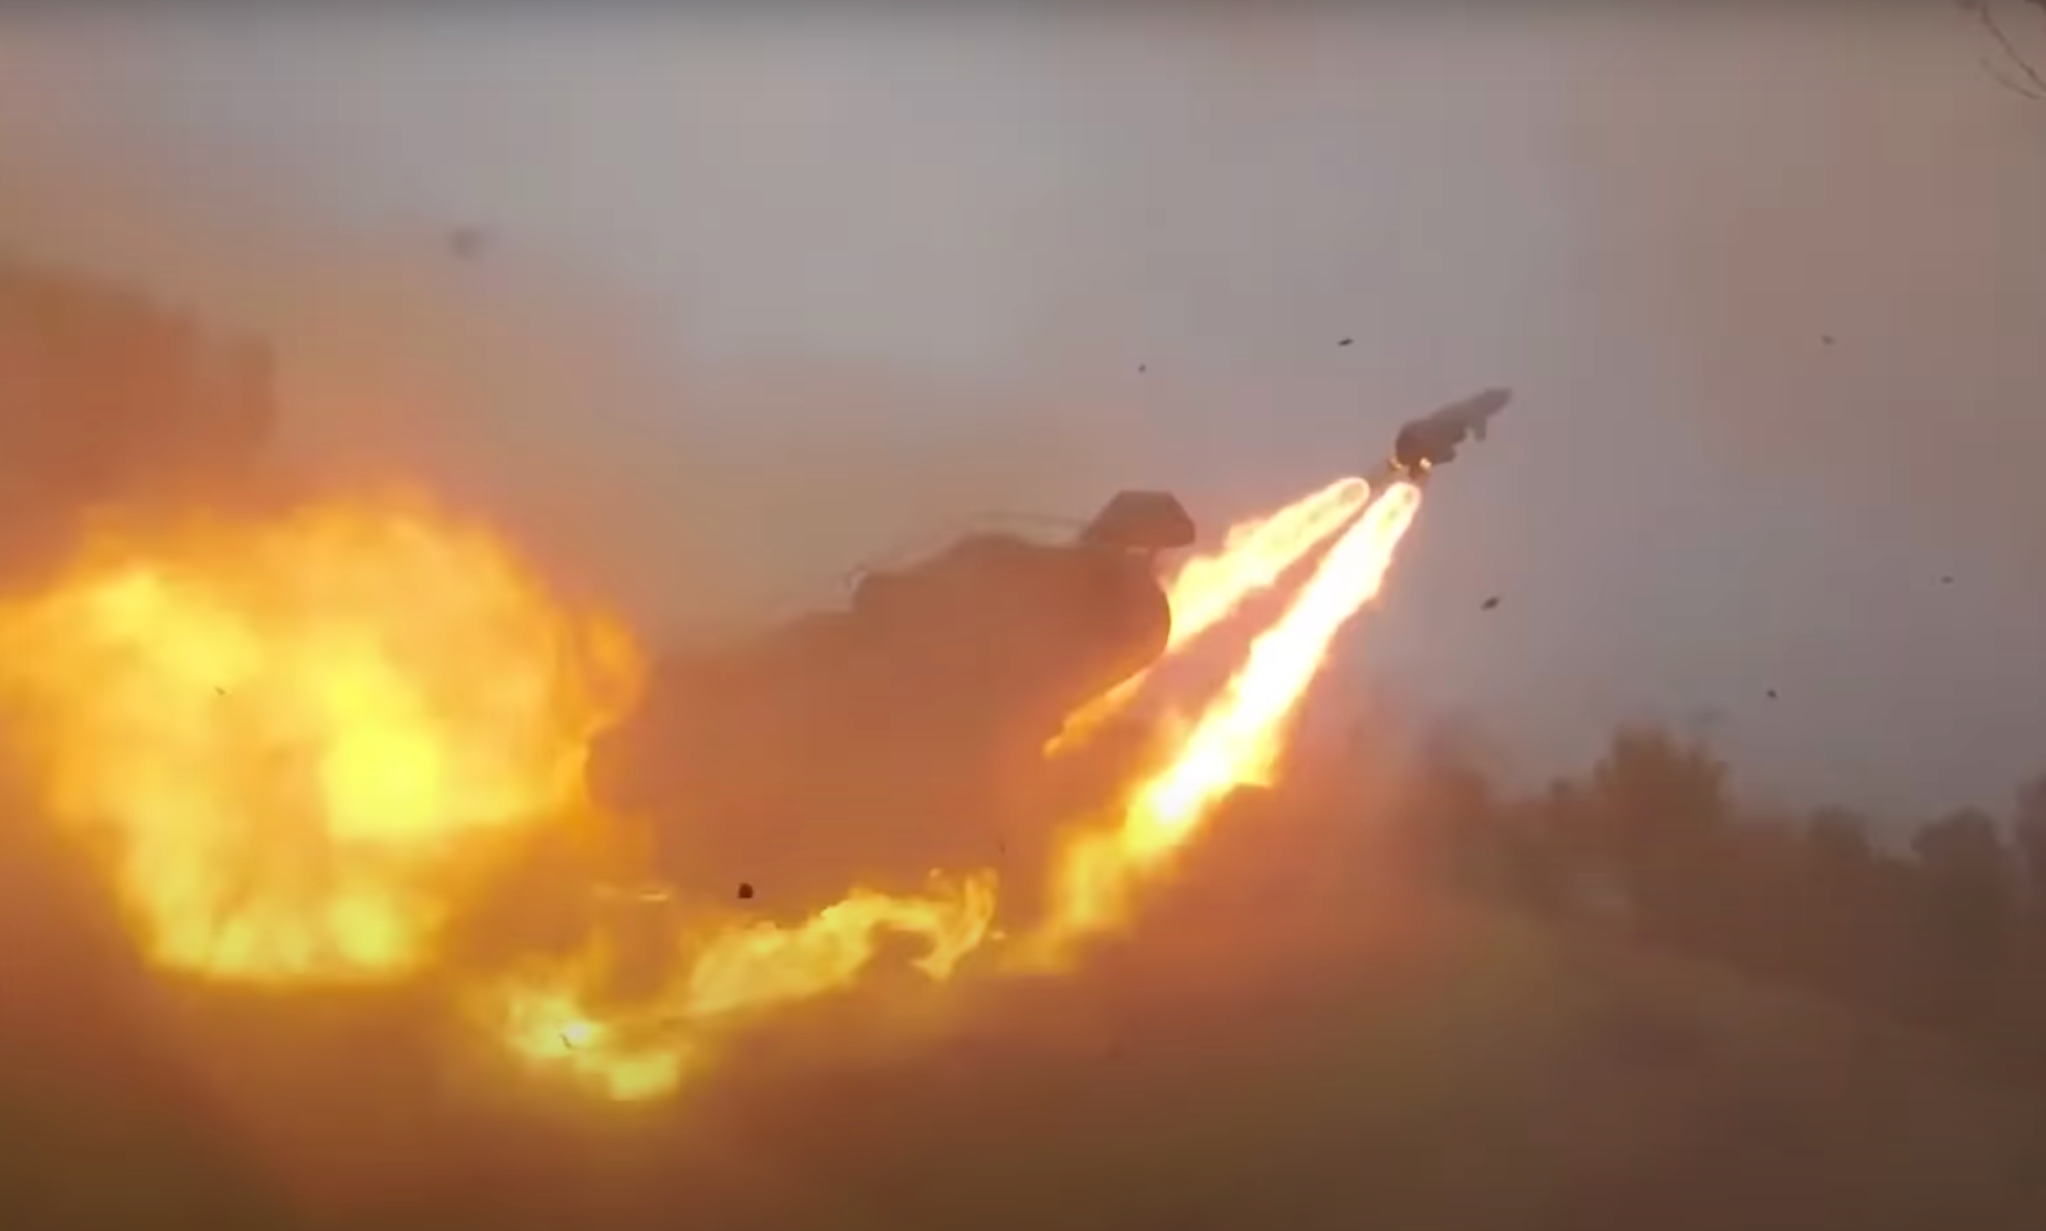 russia now using giant soviet-era ground-launched anti-ship missile to attack ukraine